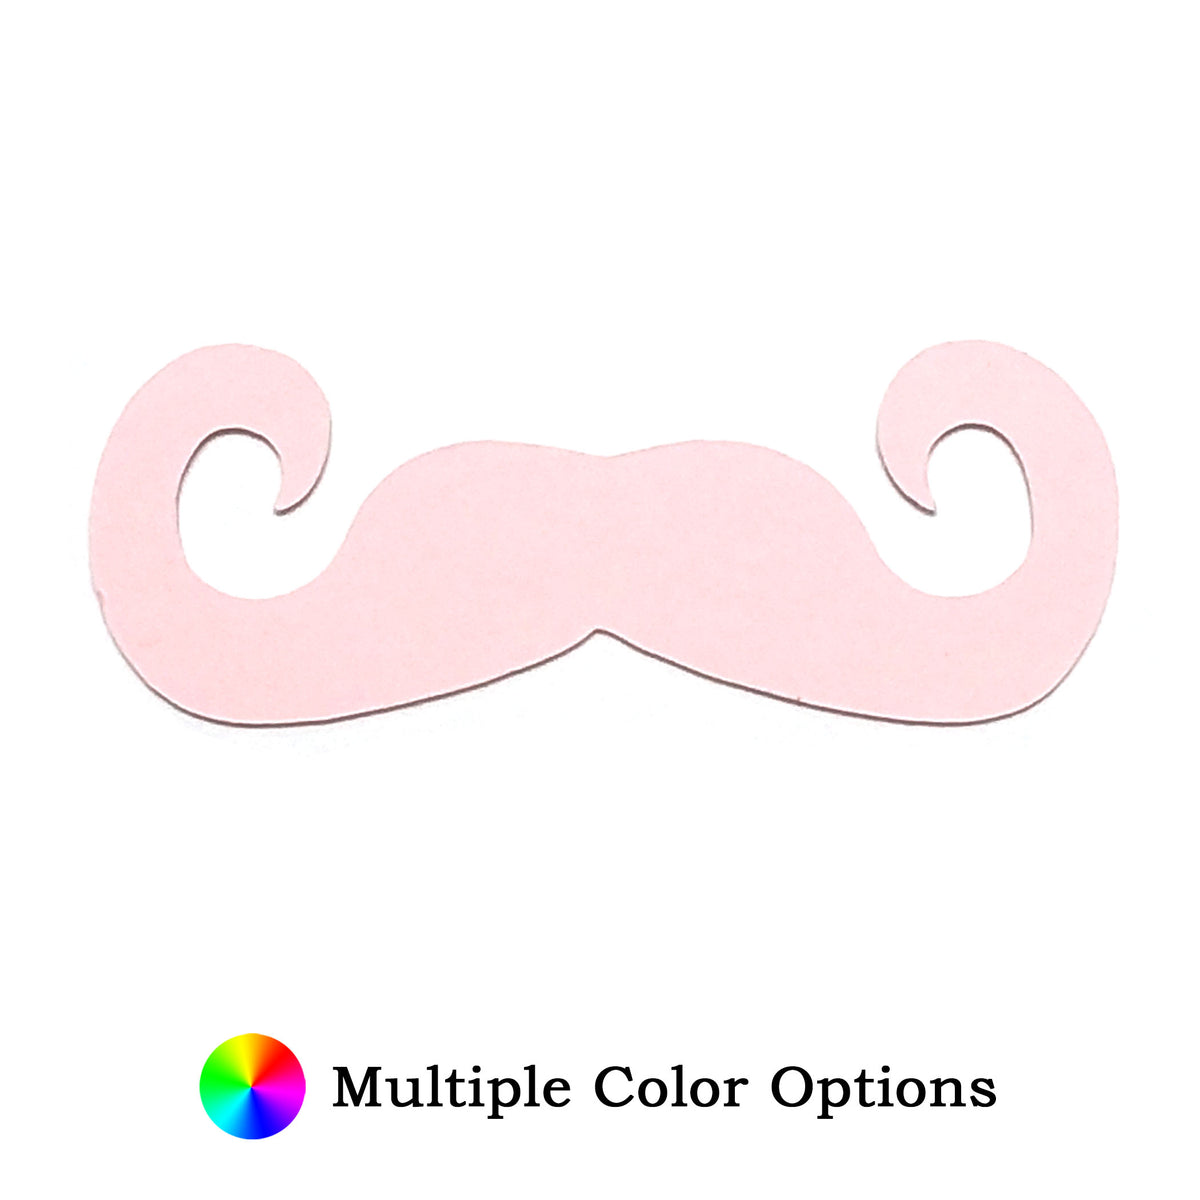 colorful mustaches